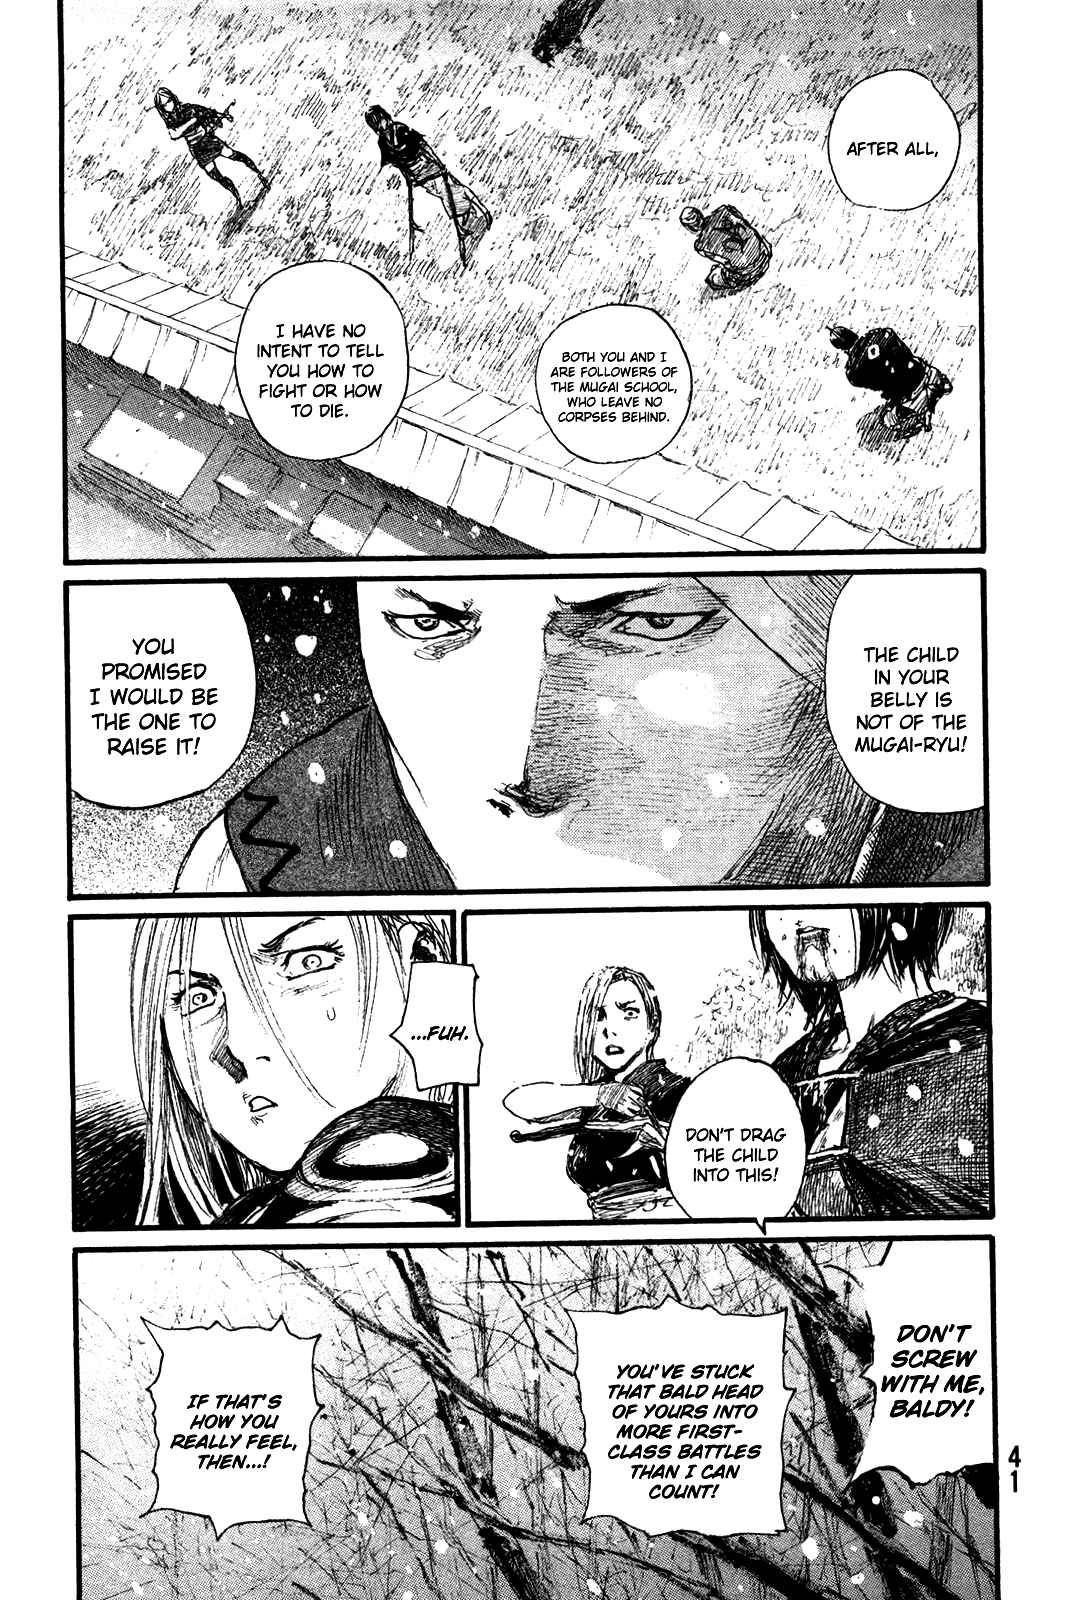 Blade of the Immortal Vol. 30 Ch. 199 Glorious Death in Winter Thunder (Part 1)